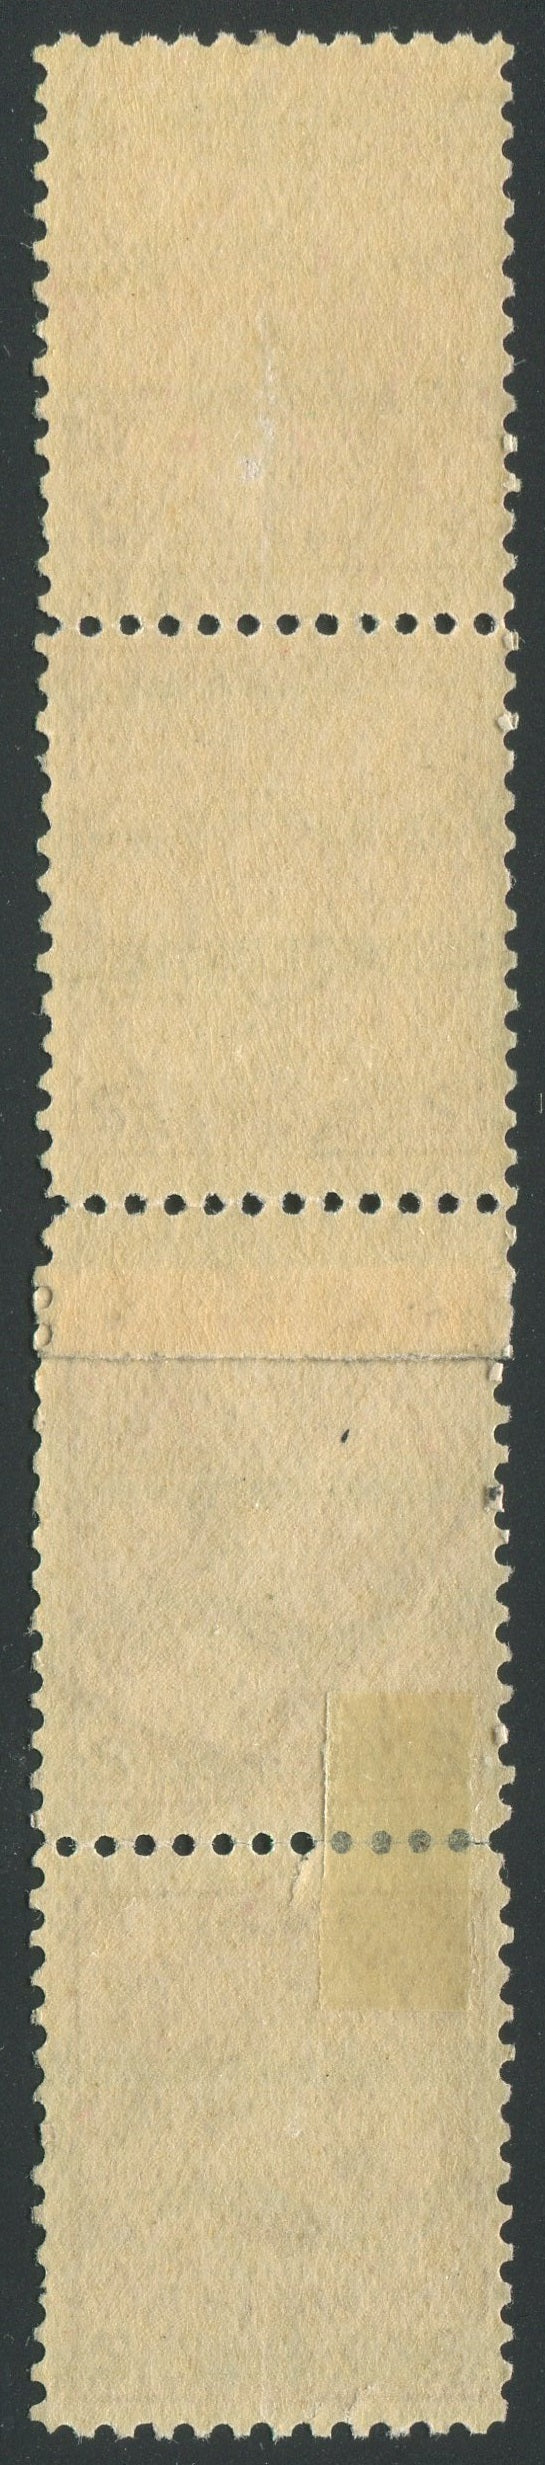 0090CA1810 - Canada #90xxxi - Mint Experimental Coil Paste-Up Strip of 4